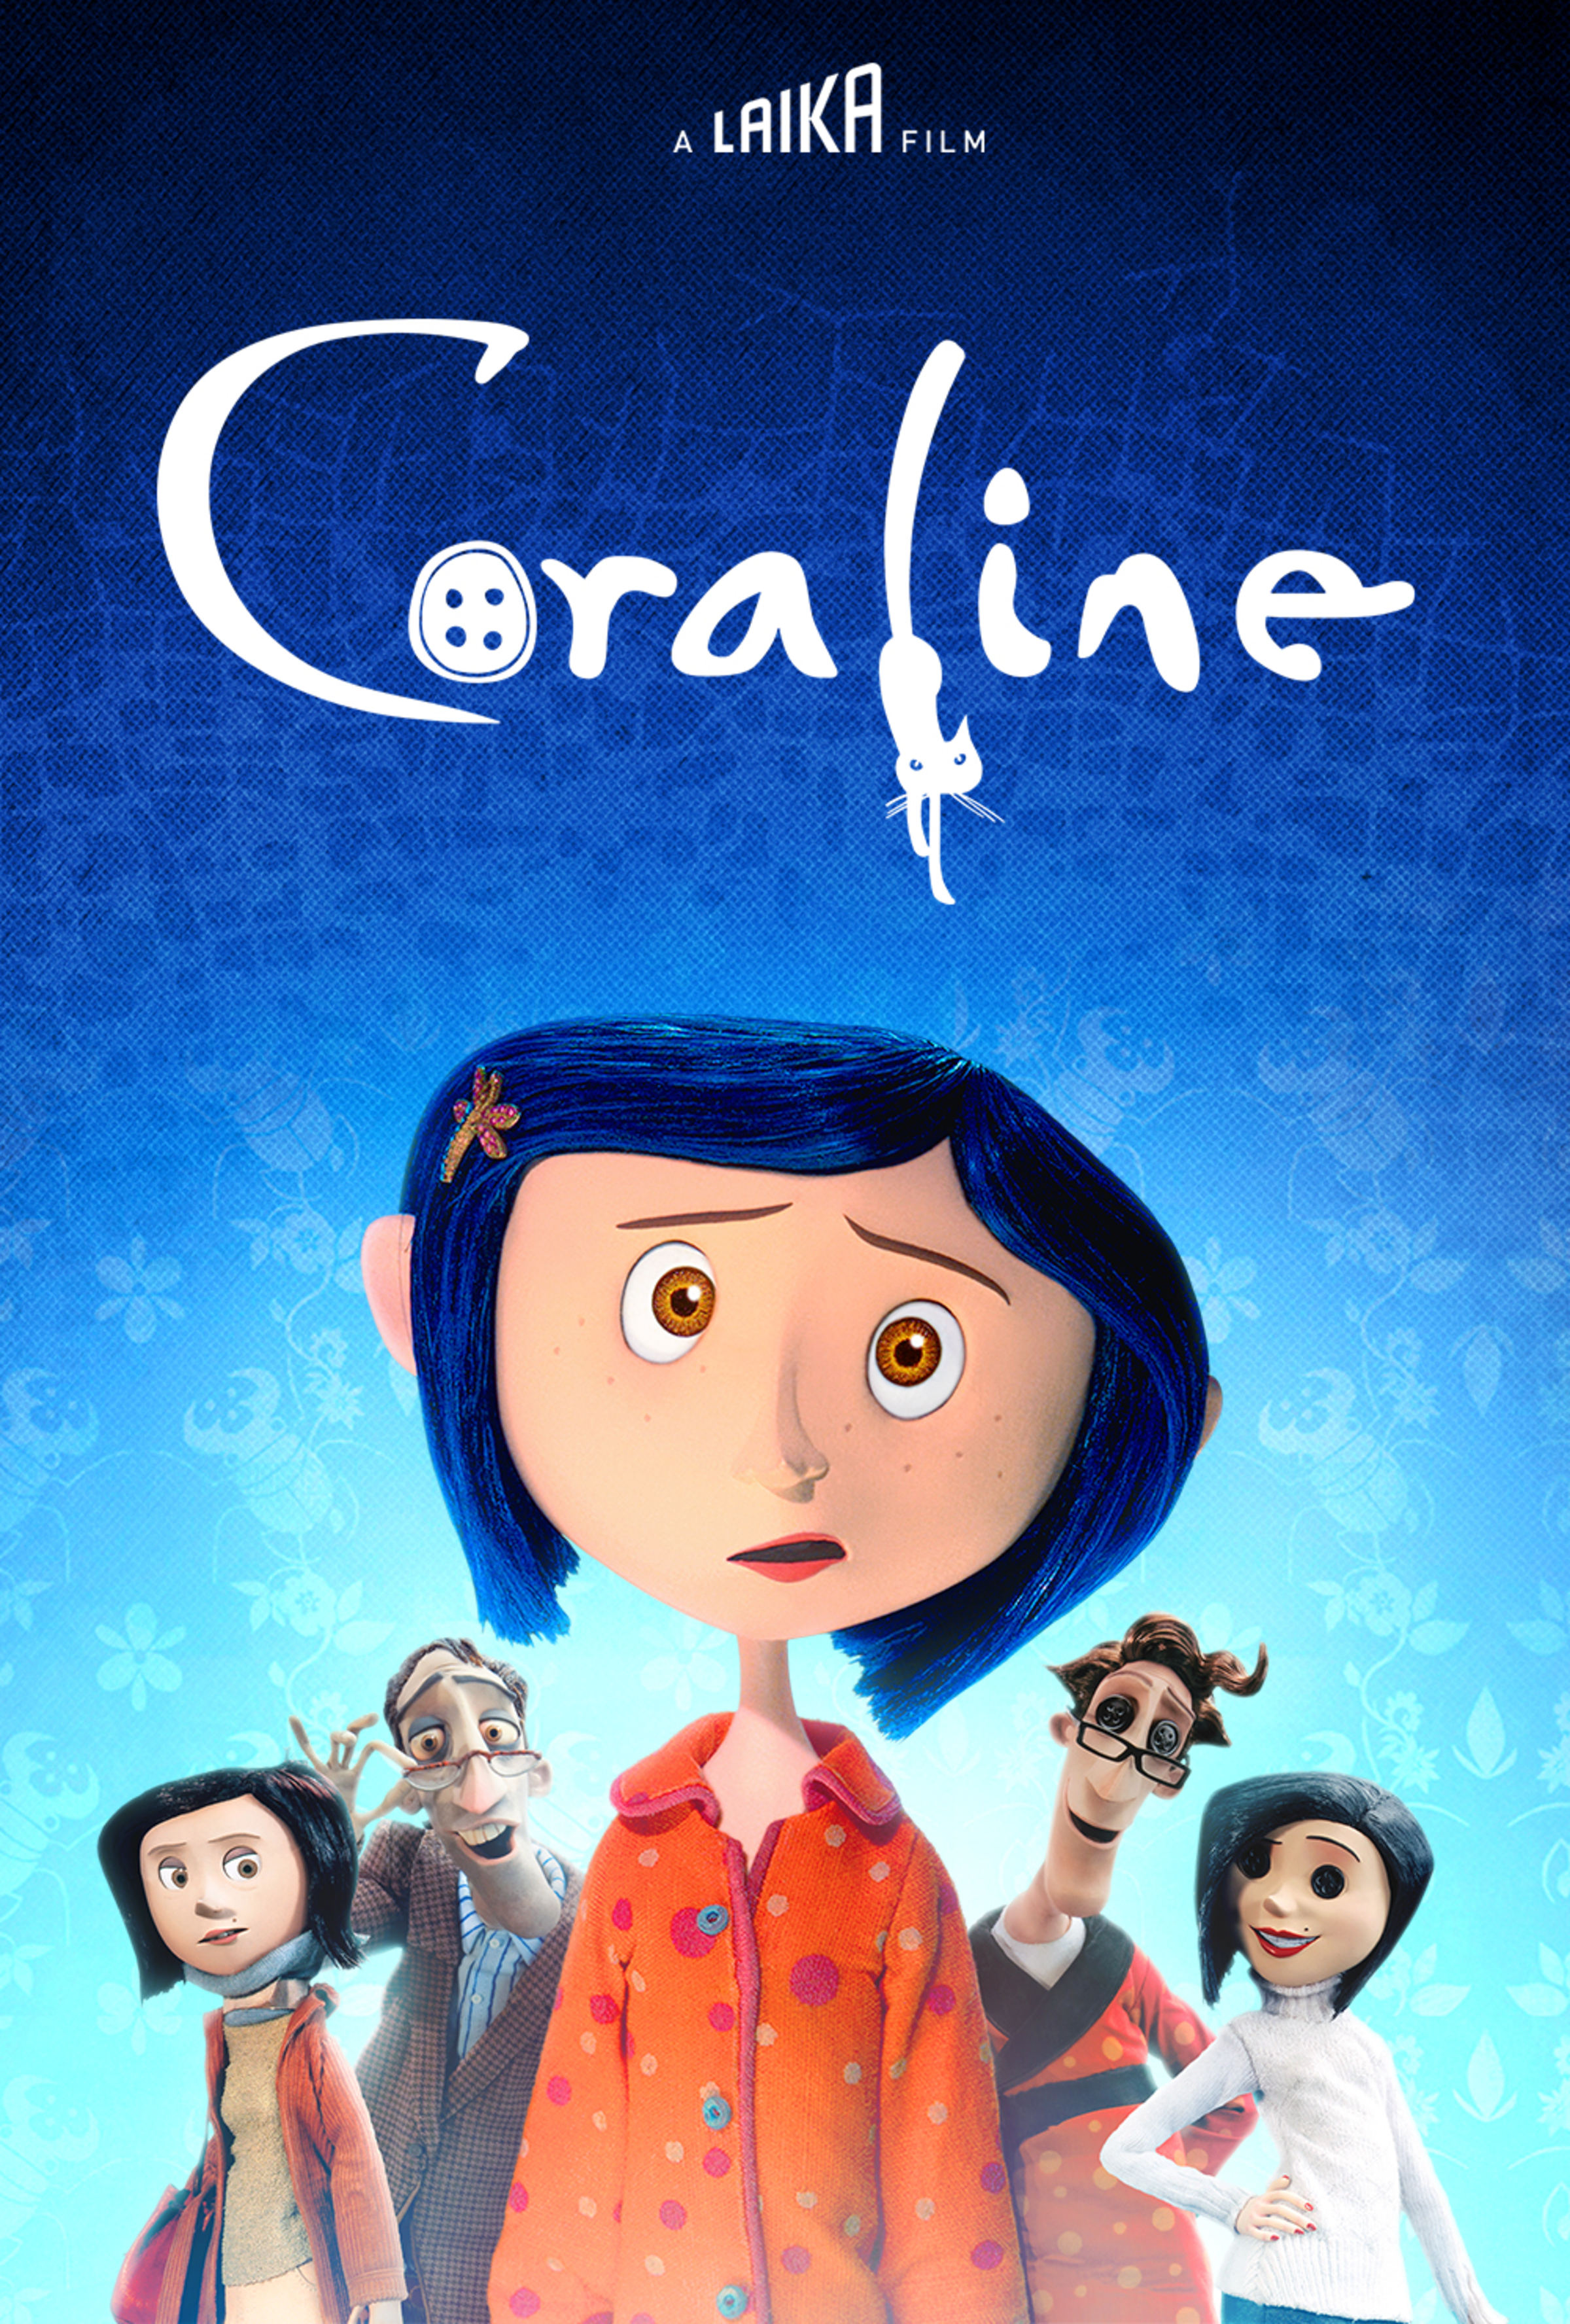 The 'Coraline' Book Vs Movie: The Book Is Even More Horrifying